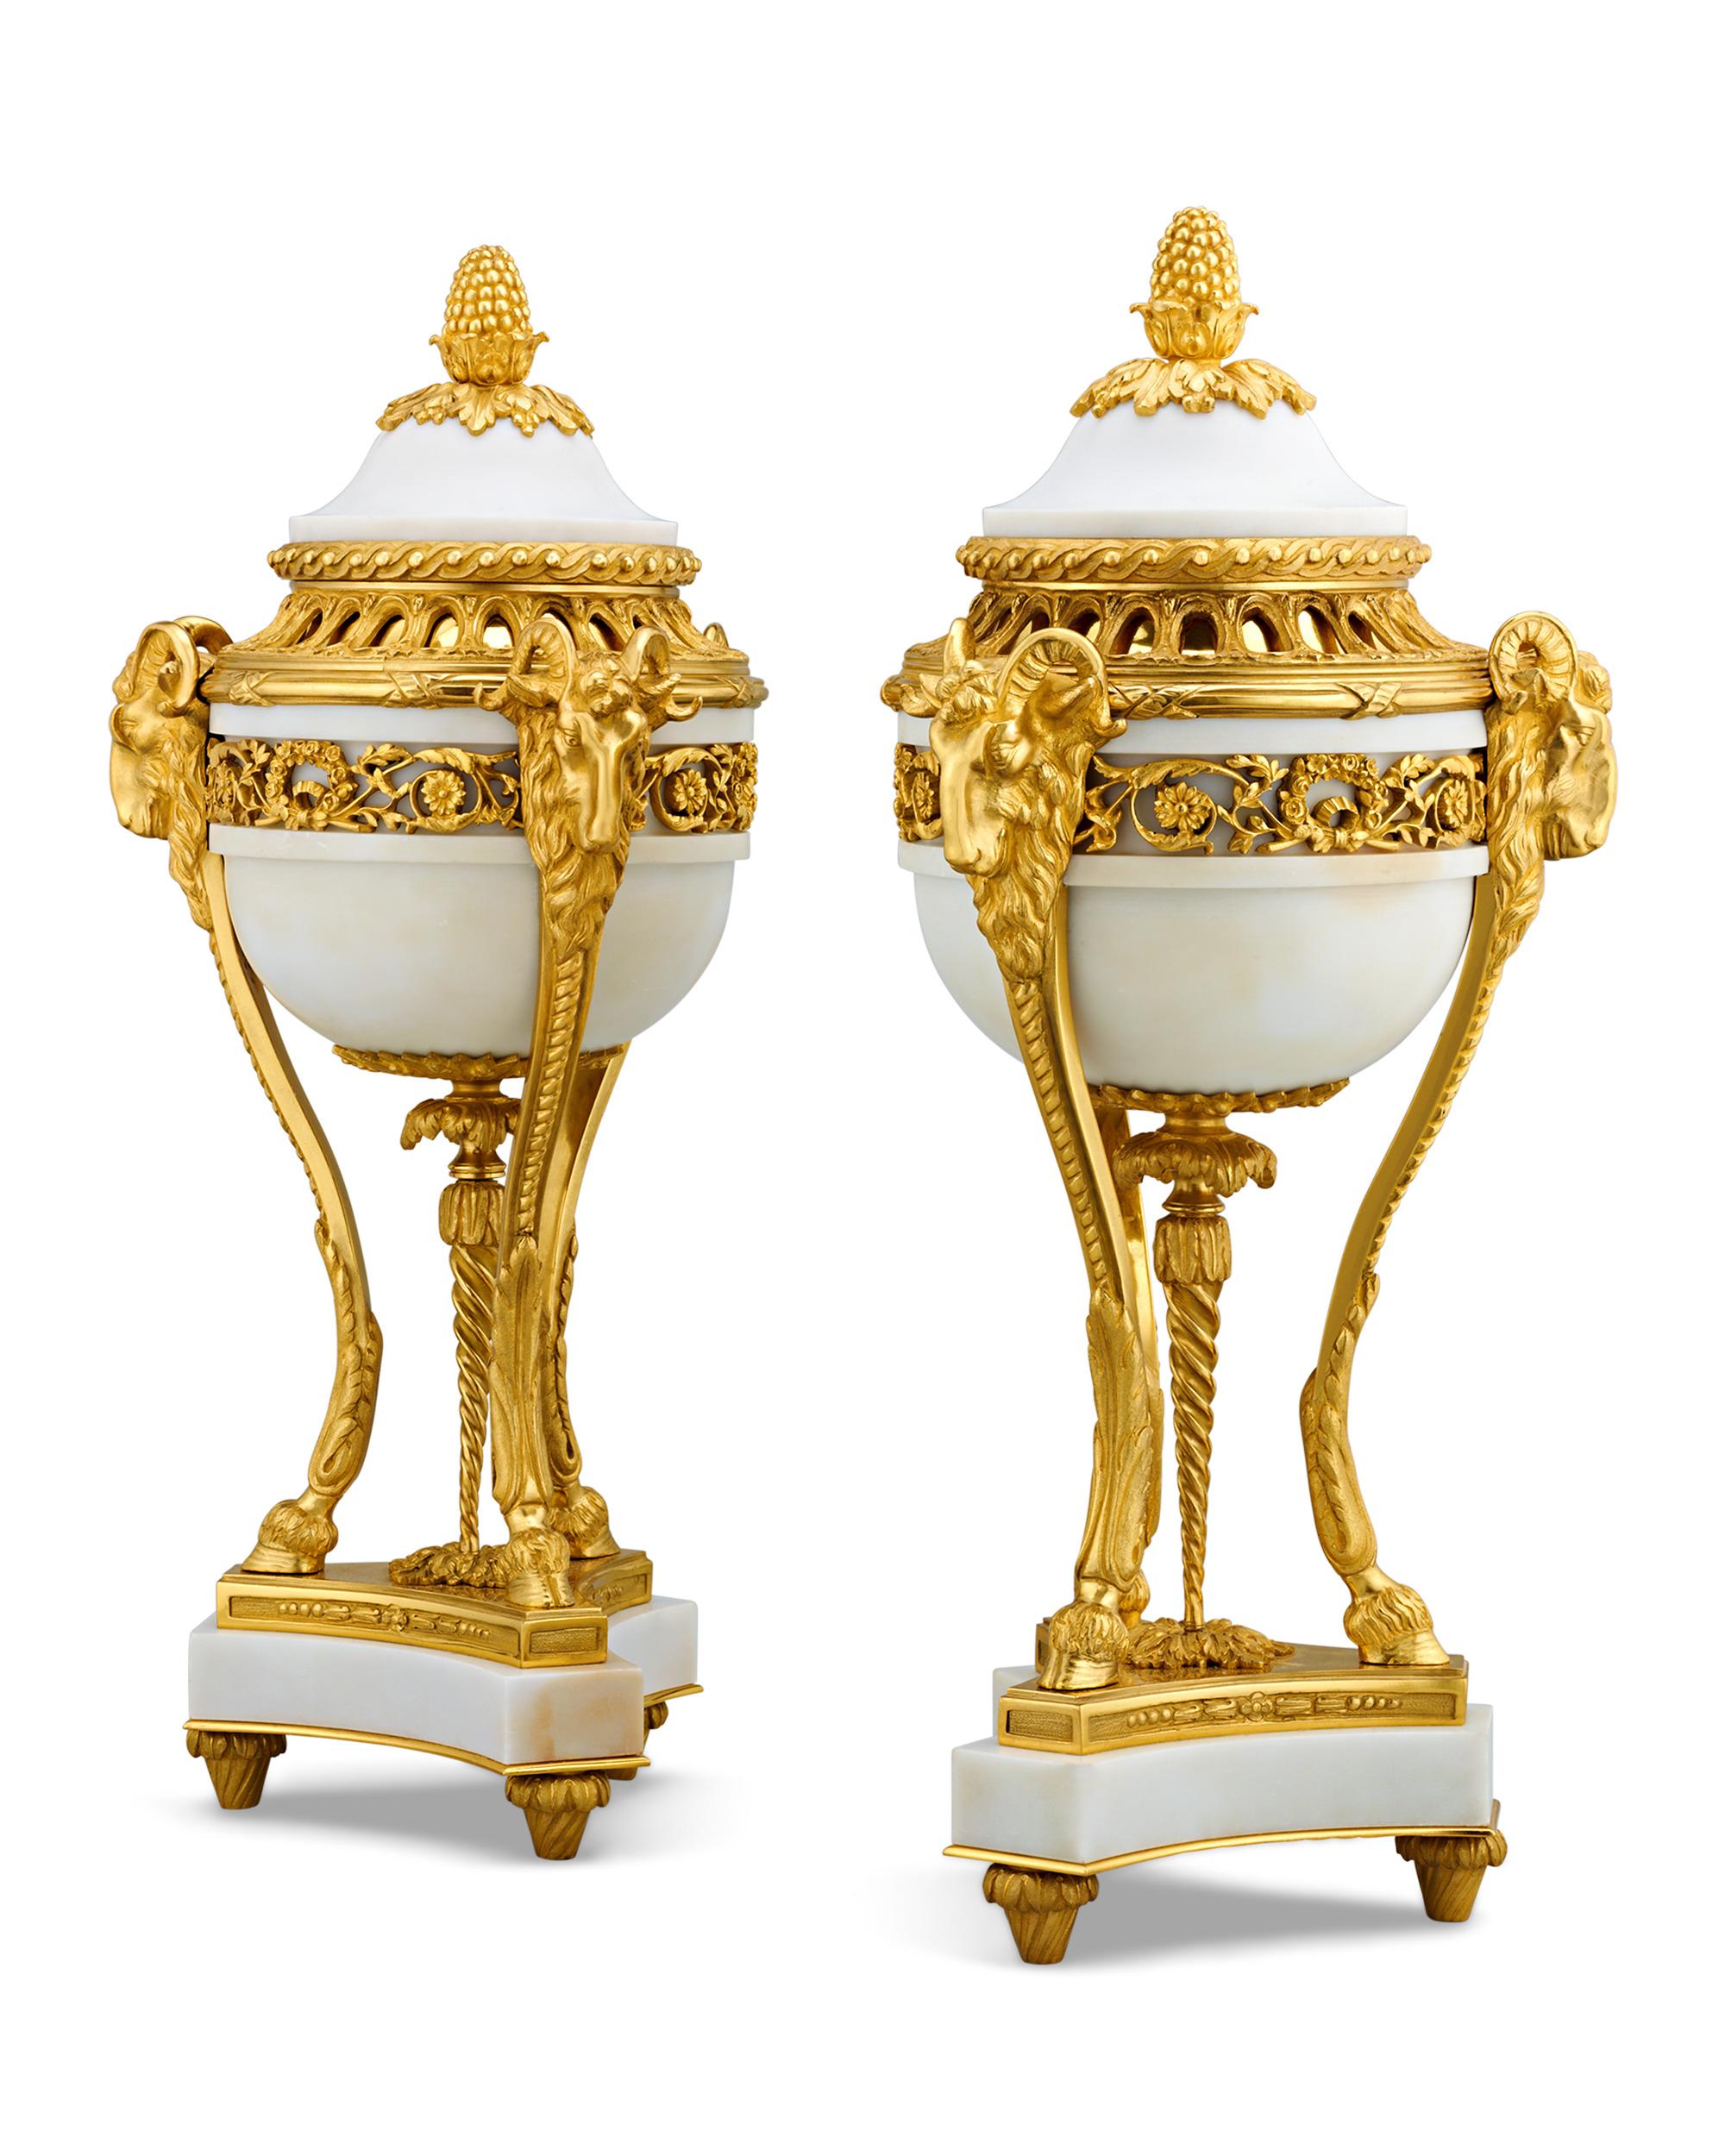 The bodies of this pair of Louis XVI-style vases, measuring nearly two feet in height, are formed from stunning specimens of white marble. Doré bronze mounts in the Louis XVI style perfectly contrast with the bright hues of the hardstone. Classical